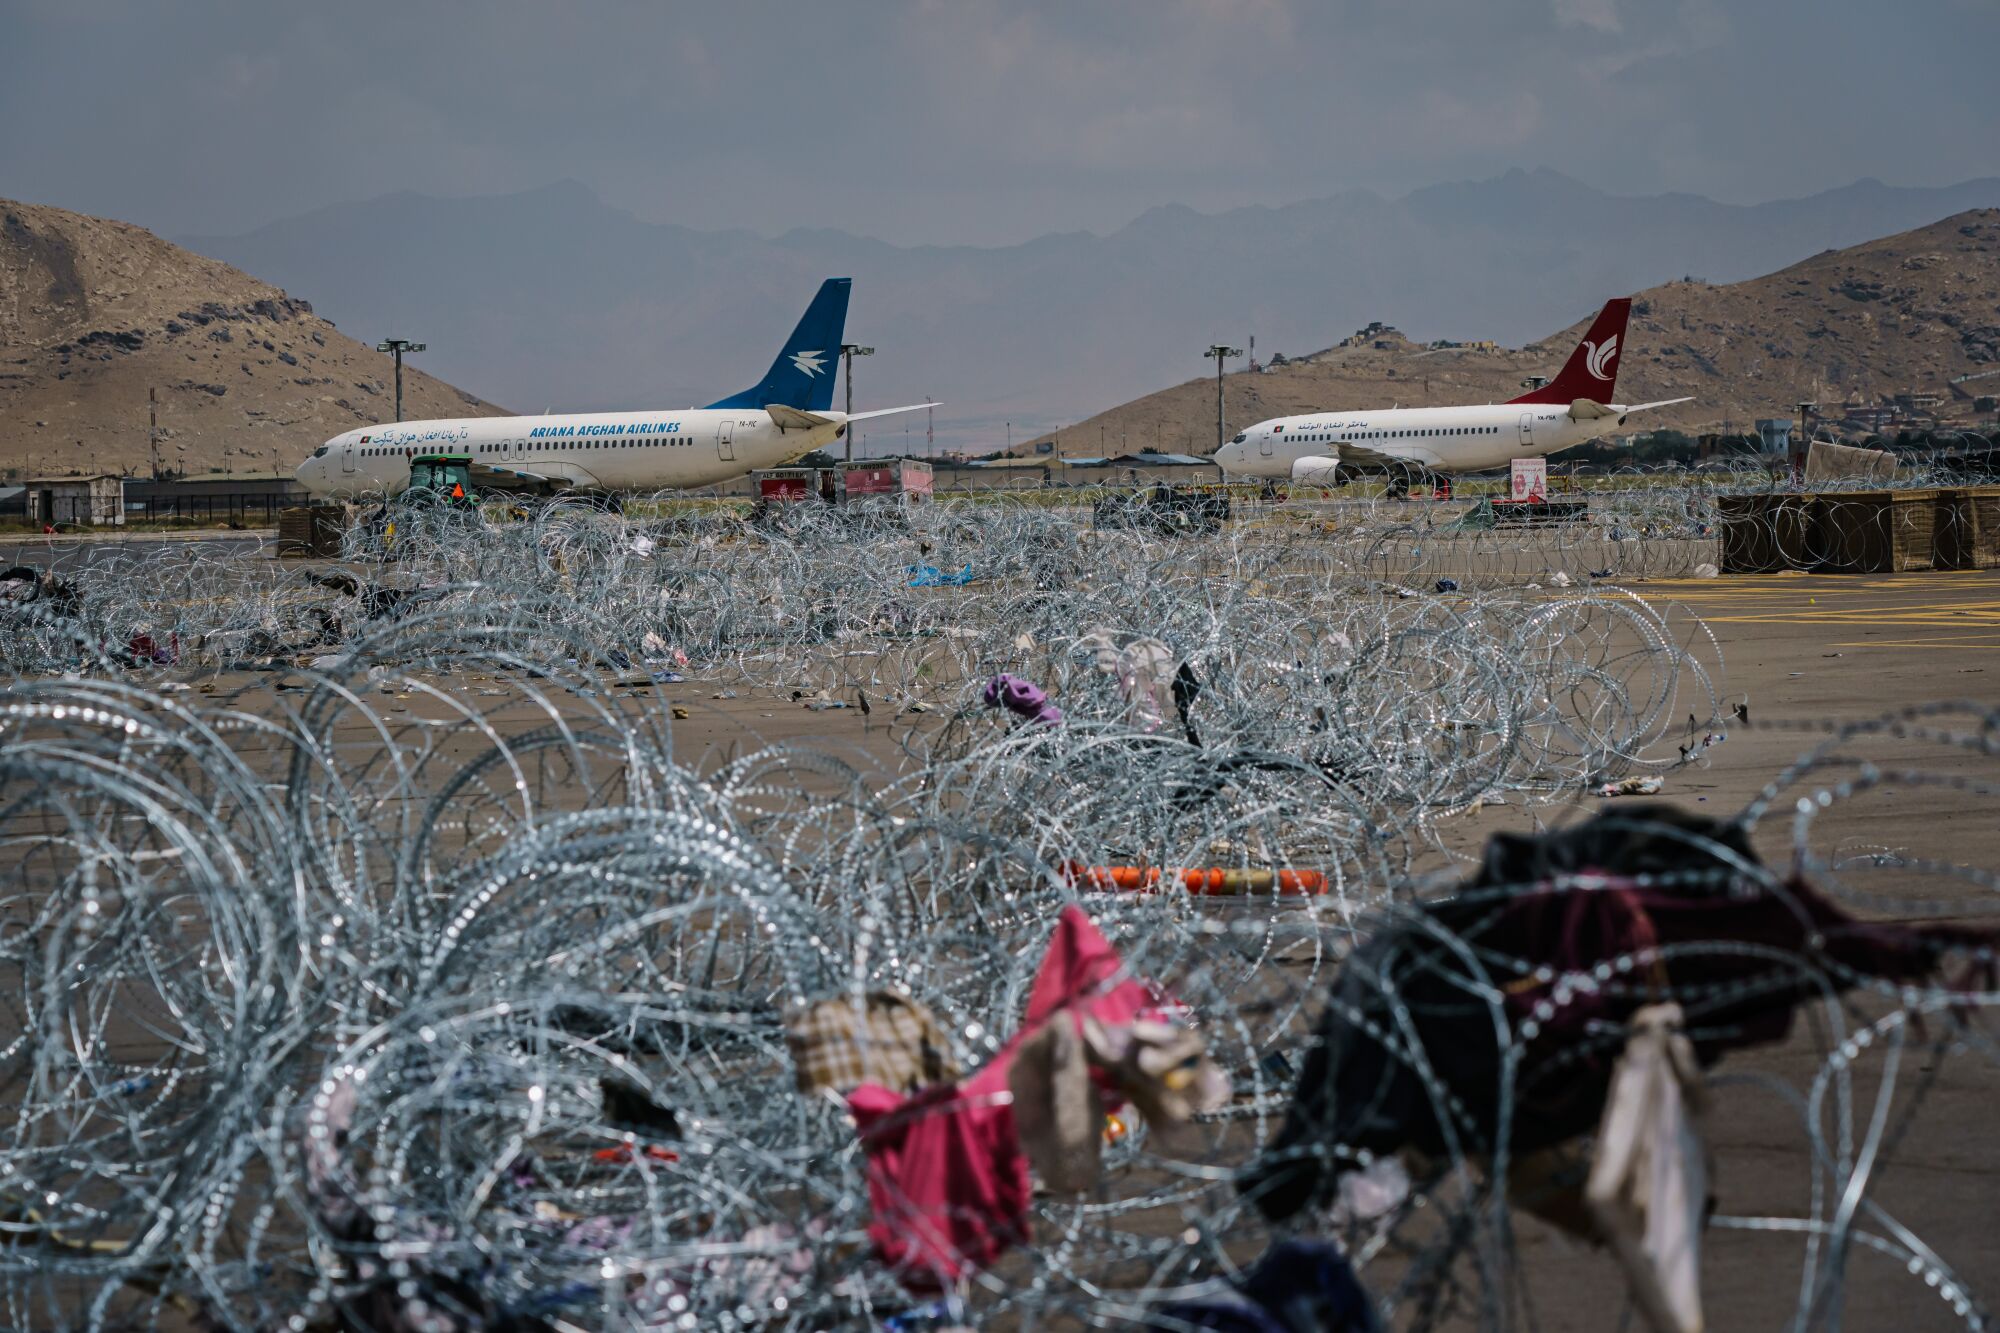 Barbed wire on airport tarmac